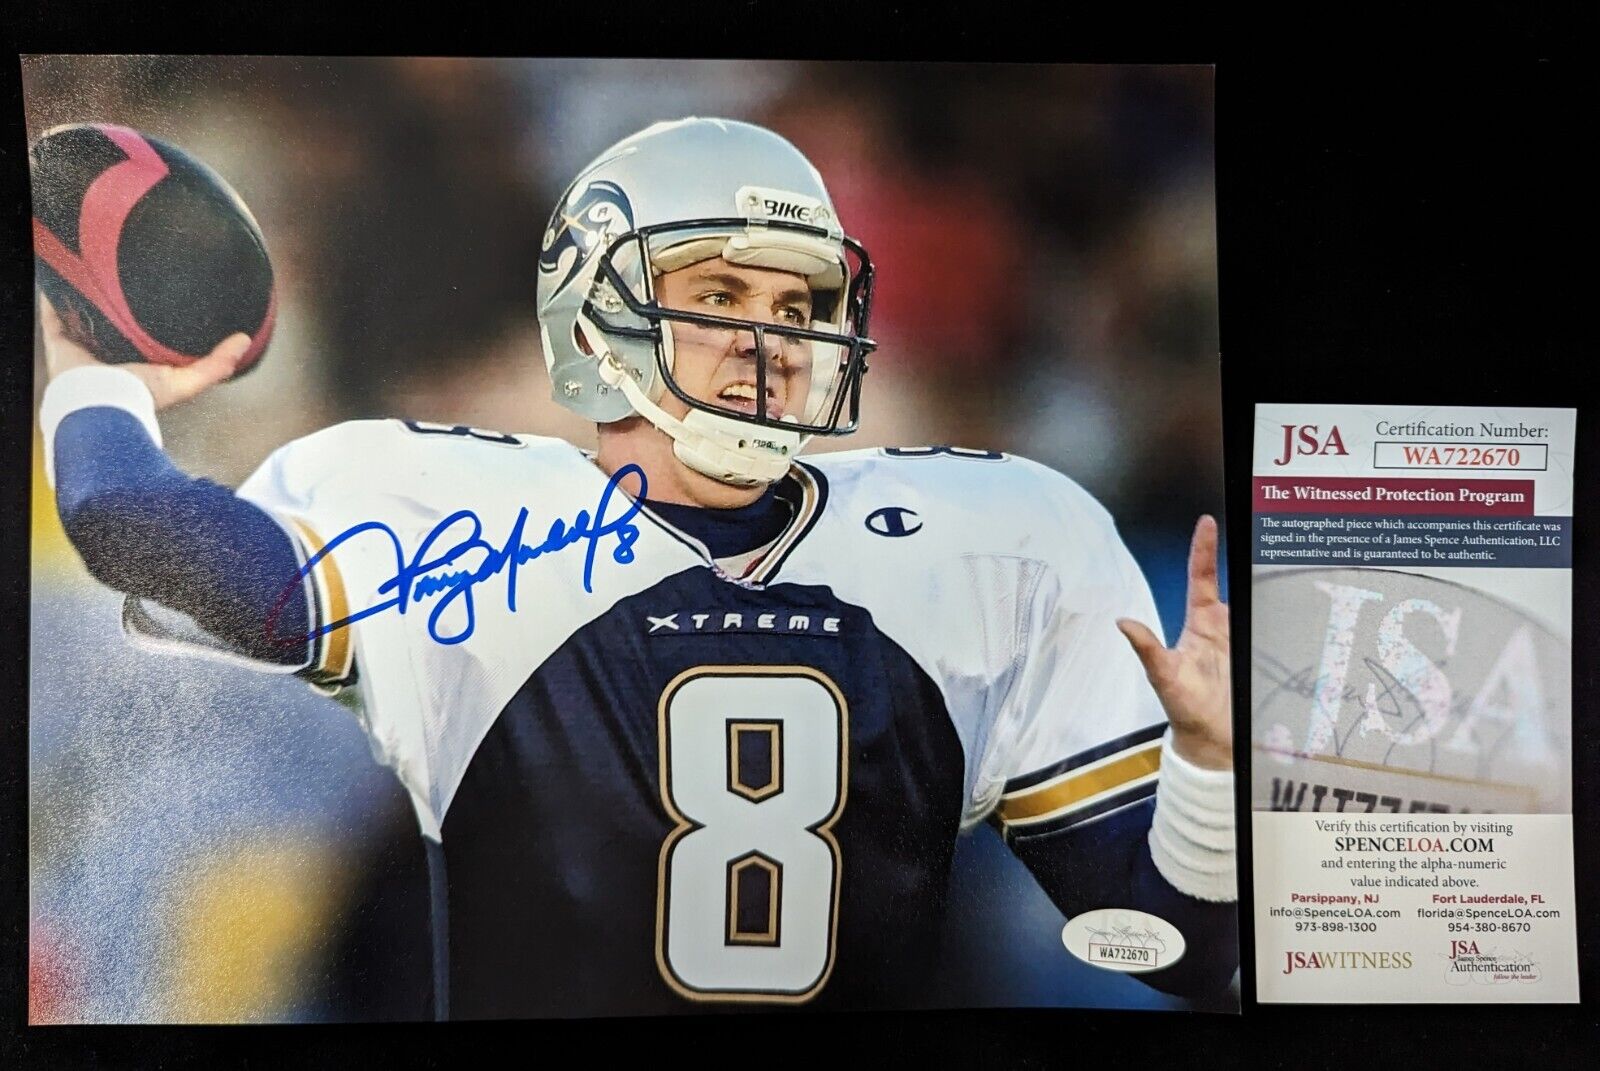 MVP Authentics Los Angeles Xtreme Tommy Maddox Autographed Signed 8X10 Photo Jsa Coa 40.50 sports jersey framing , jersey framing